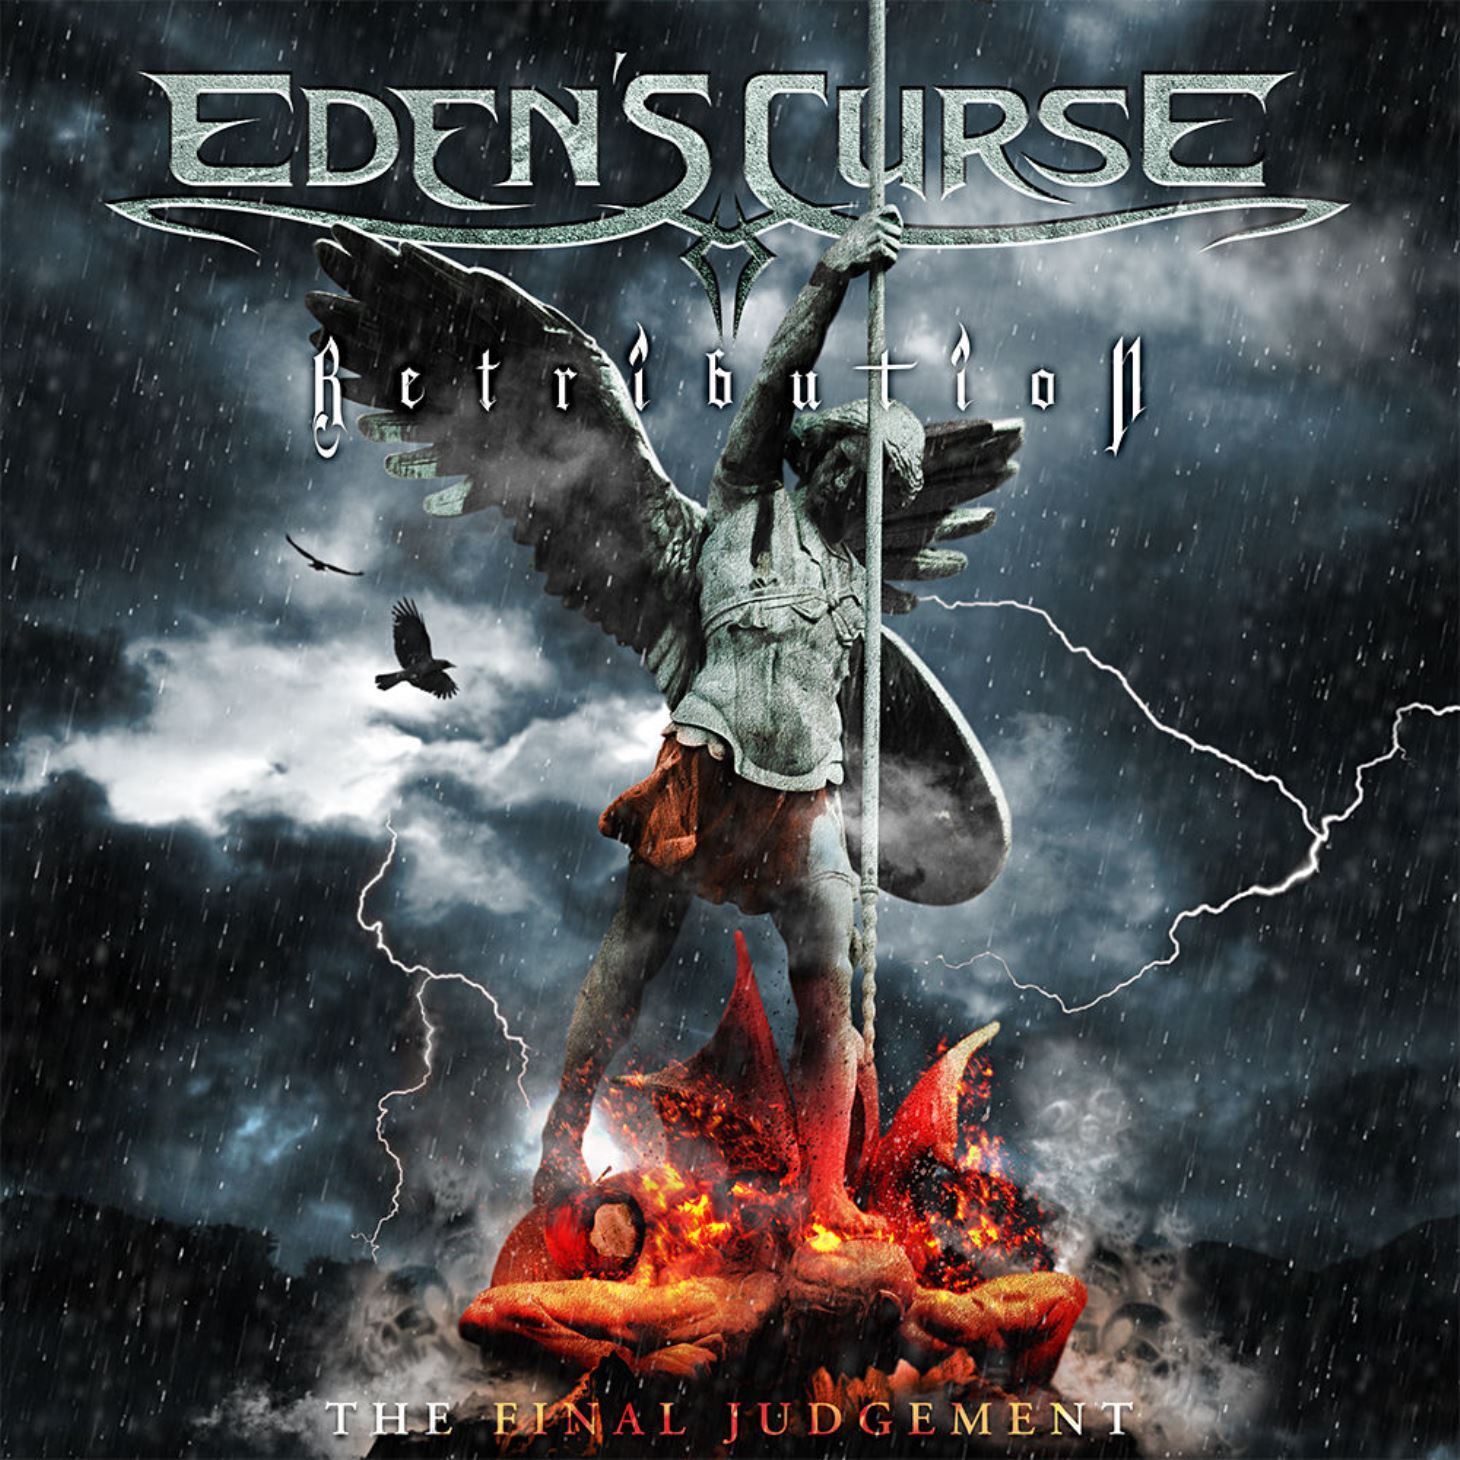 EDEN'S CURSE - RETRIBUTION 2 CD - STOP! Lowest Price Ever! Helloween - Dio - 